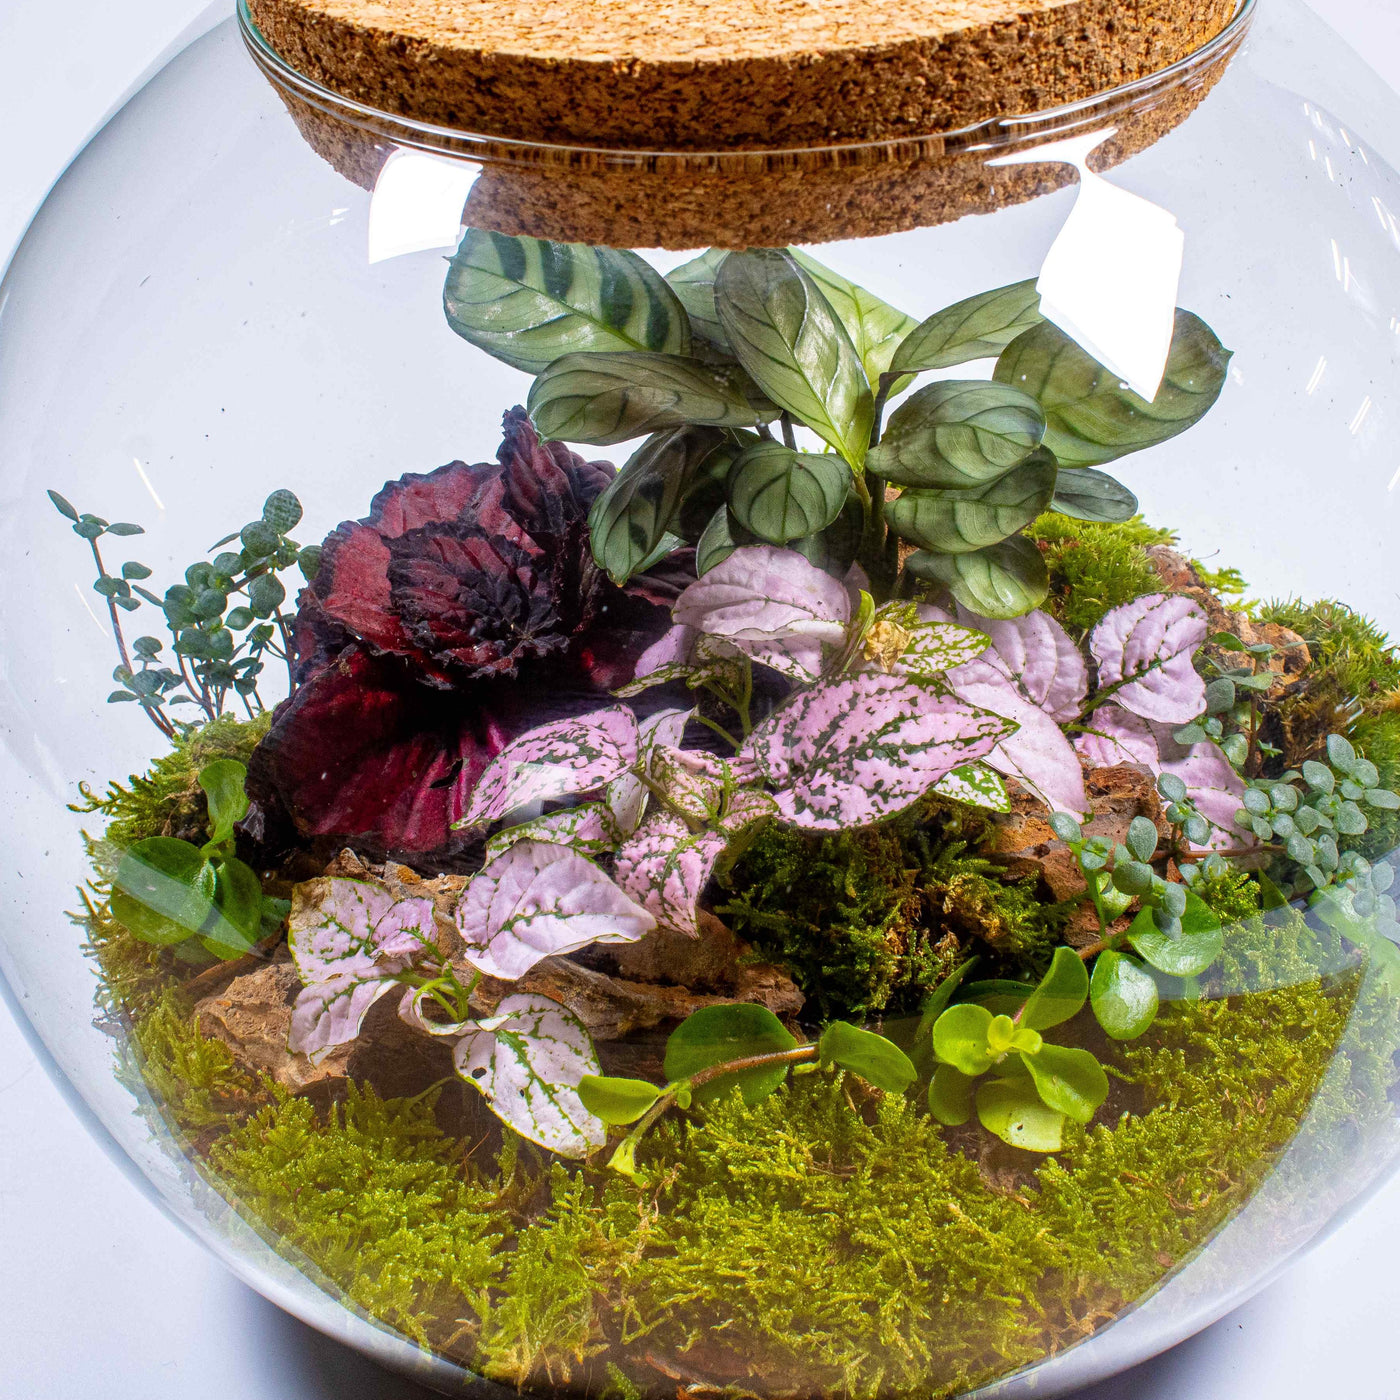 Large terrarium kit: A thoughtful and giftable option for plant lovers.